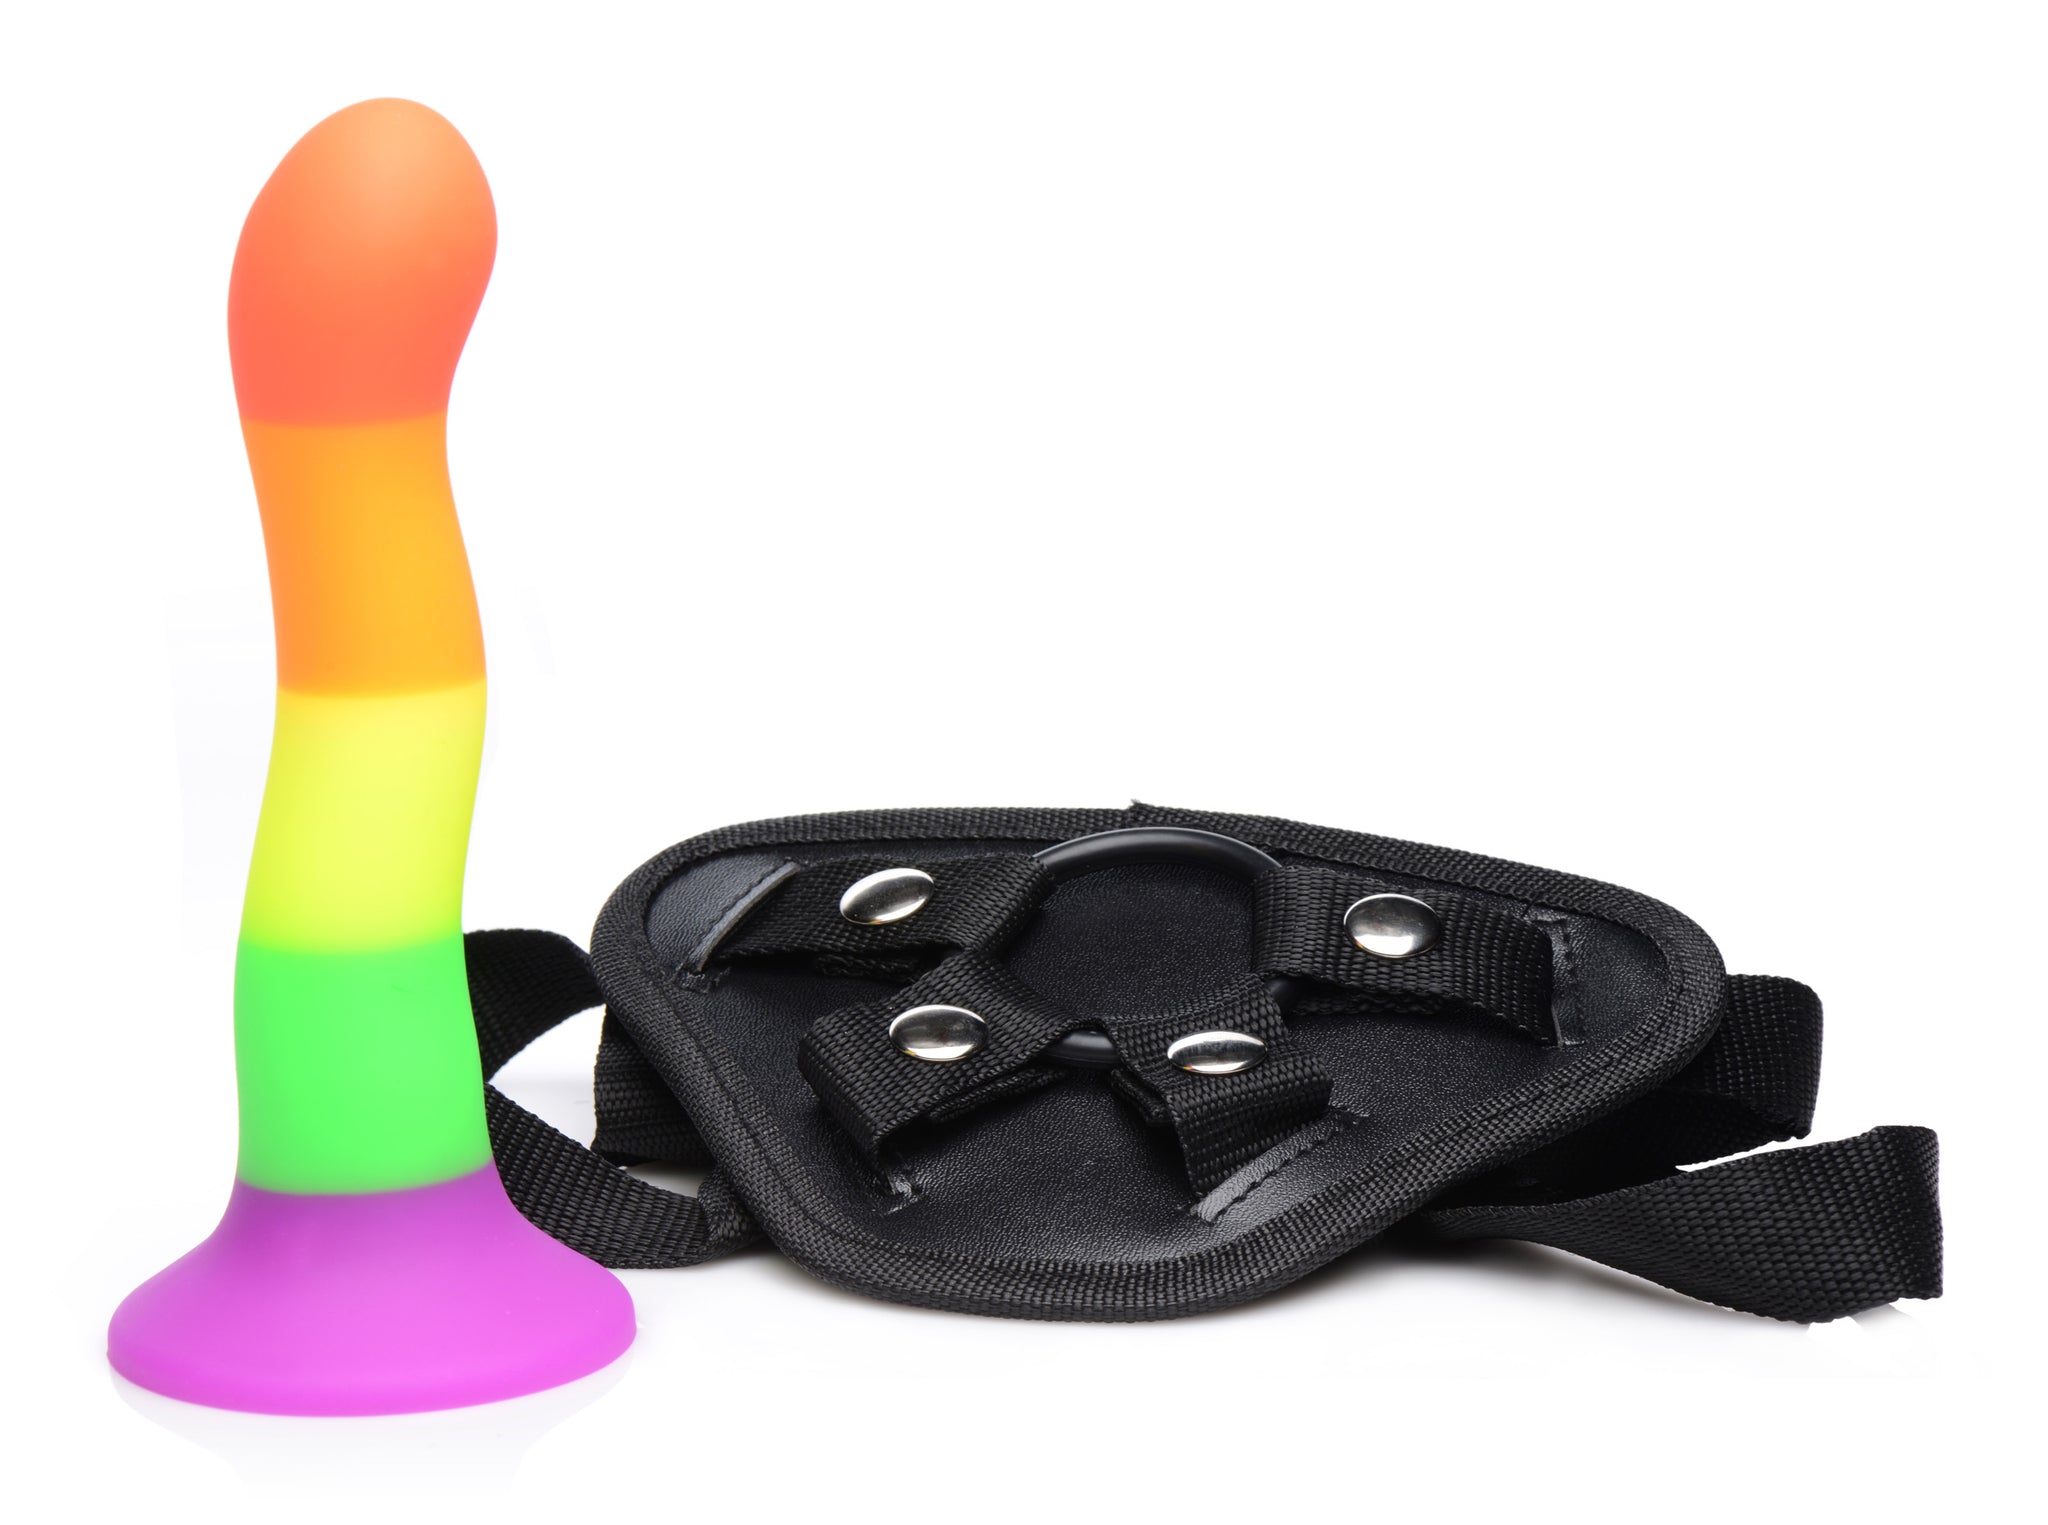 Proud Rainbow Silicone Dildo With Harness SU-AG245